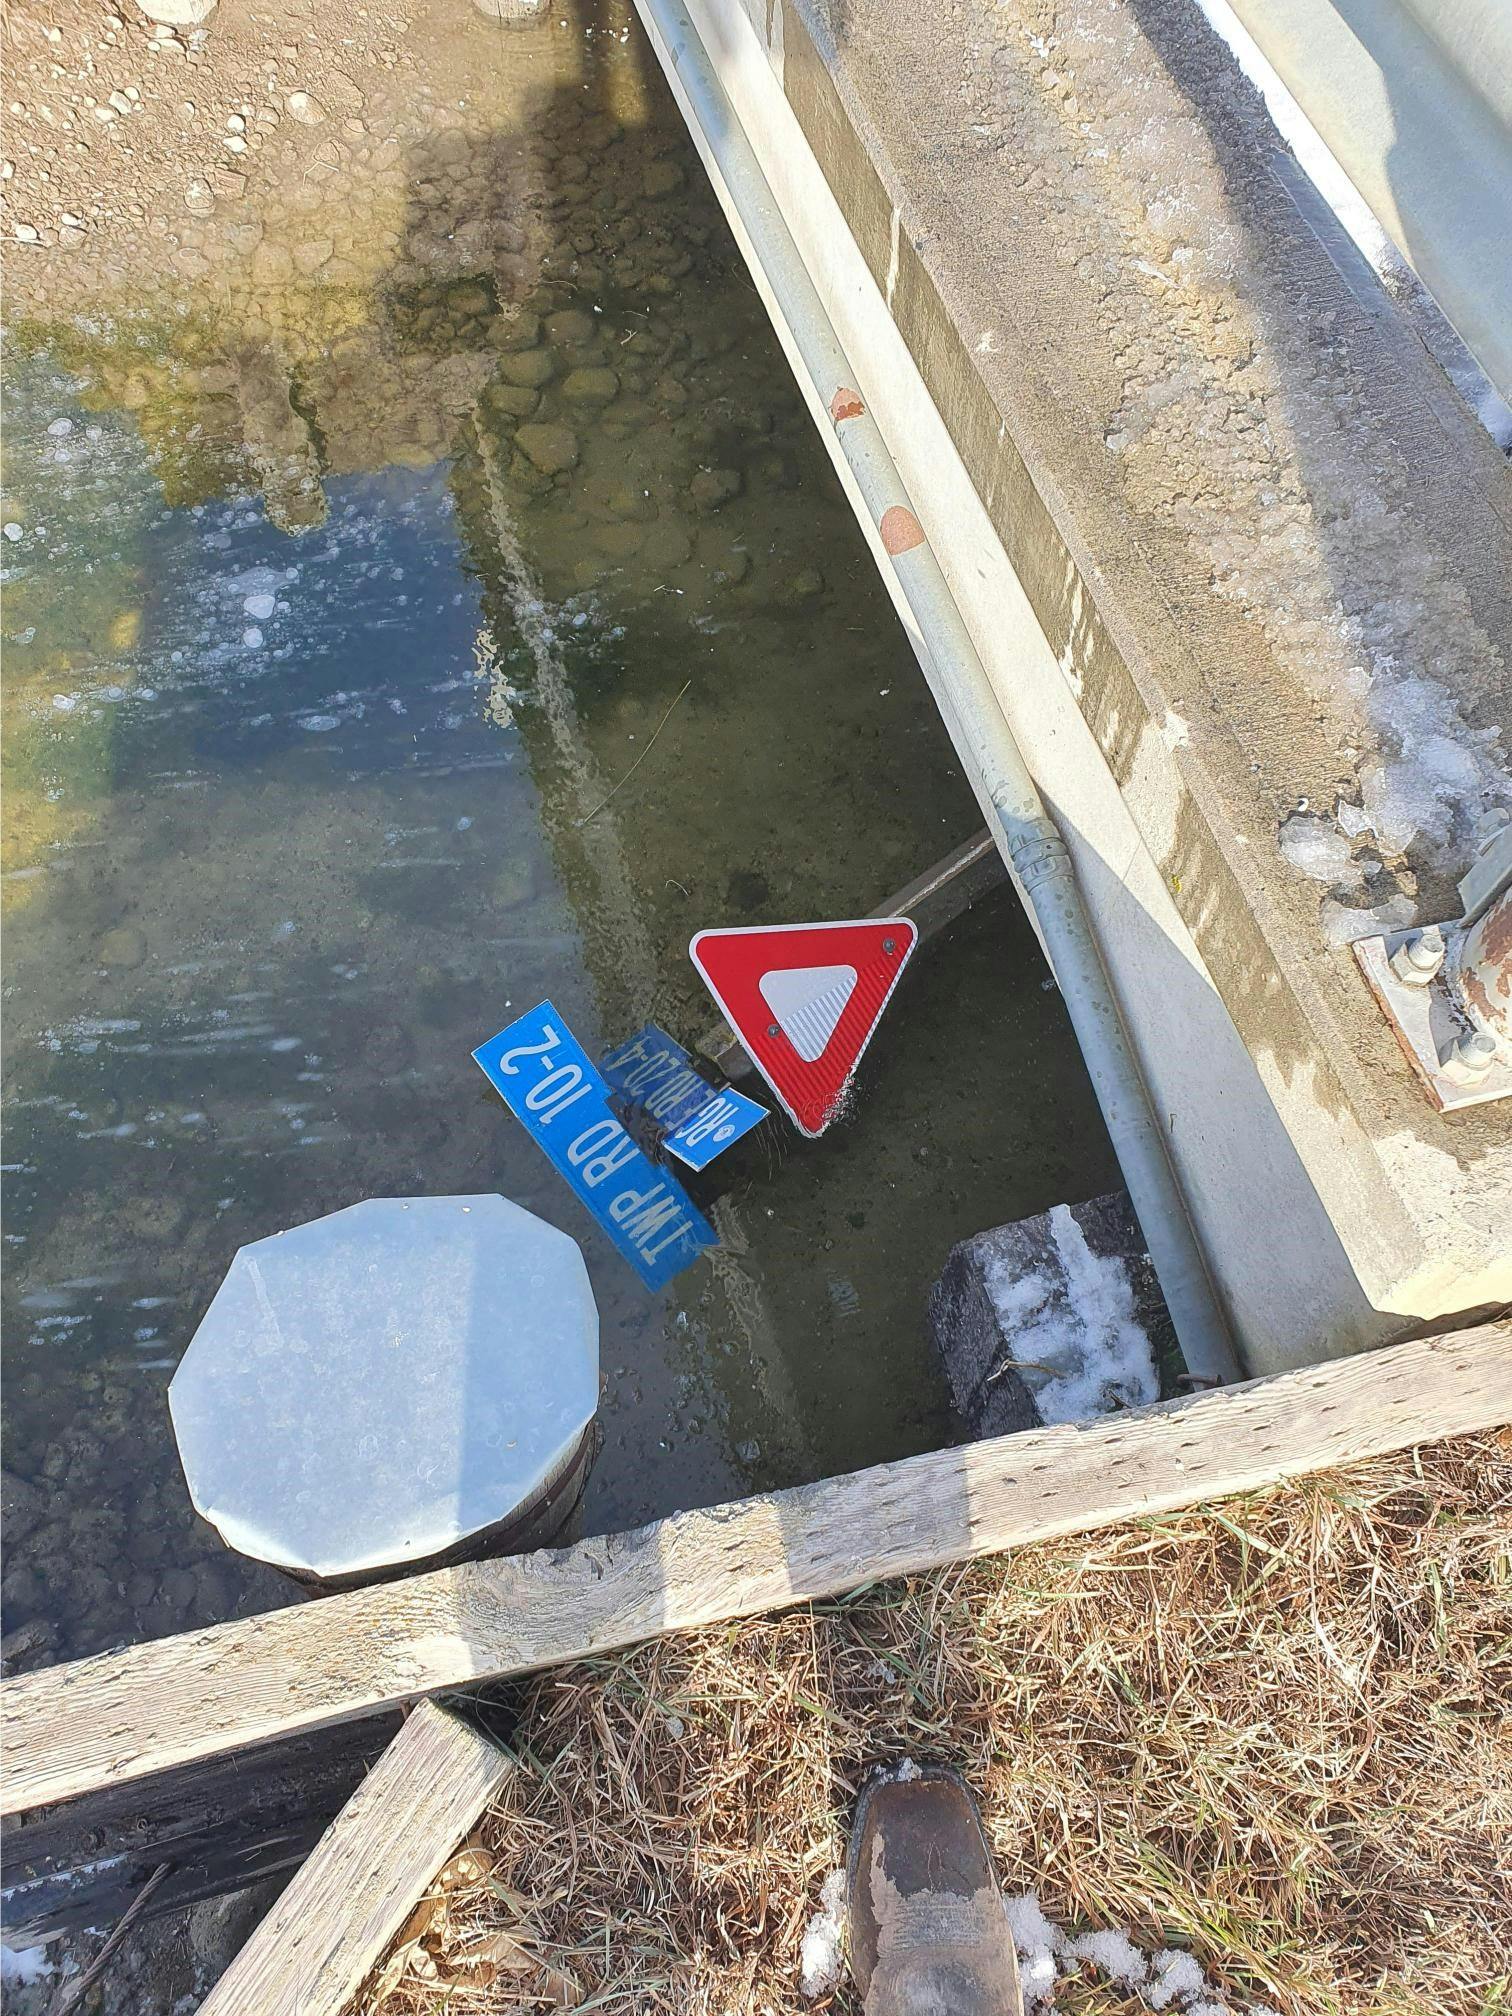 A yield sign was removed and discarded into a canal